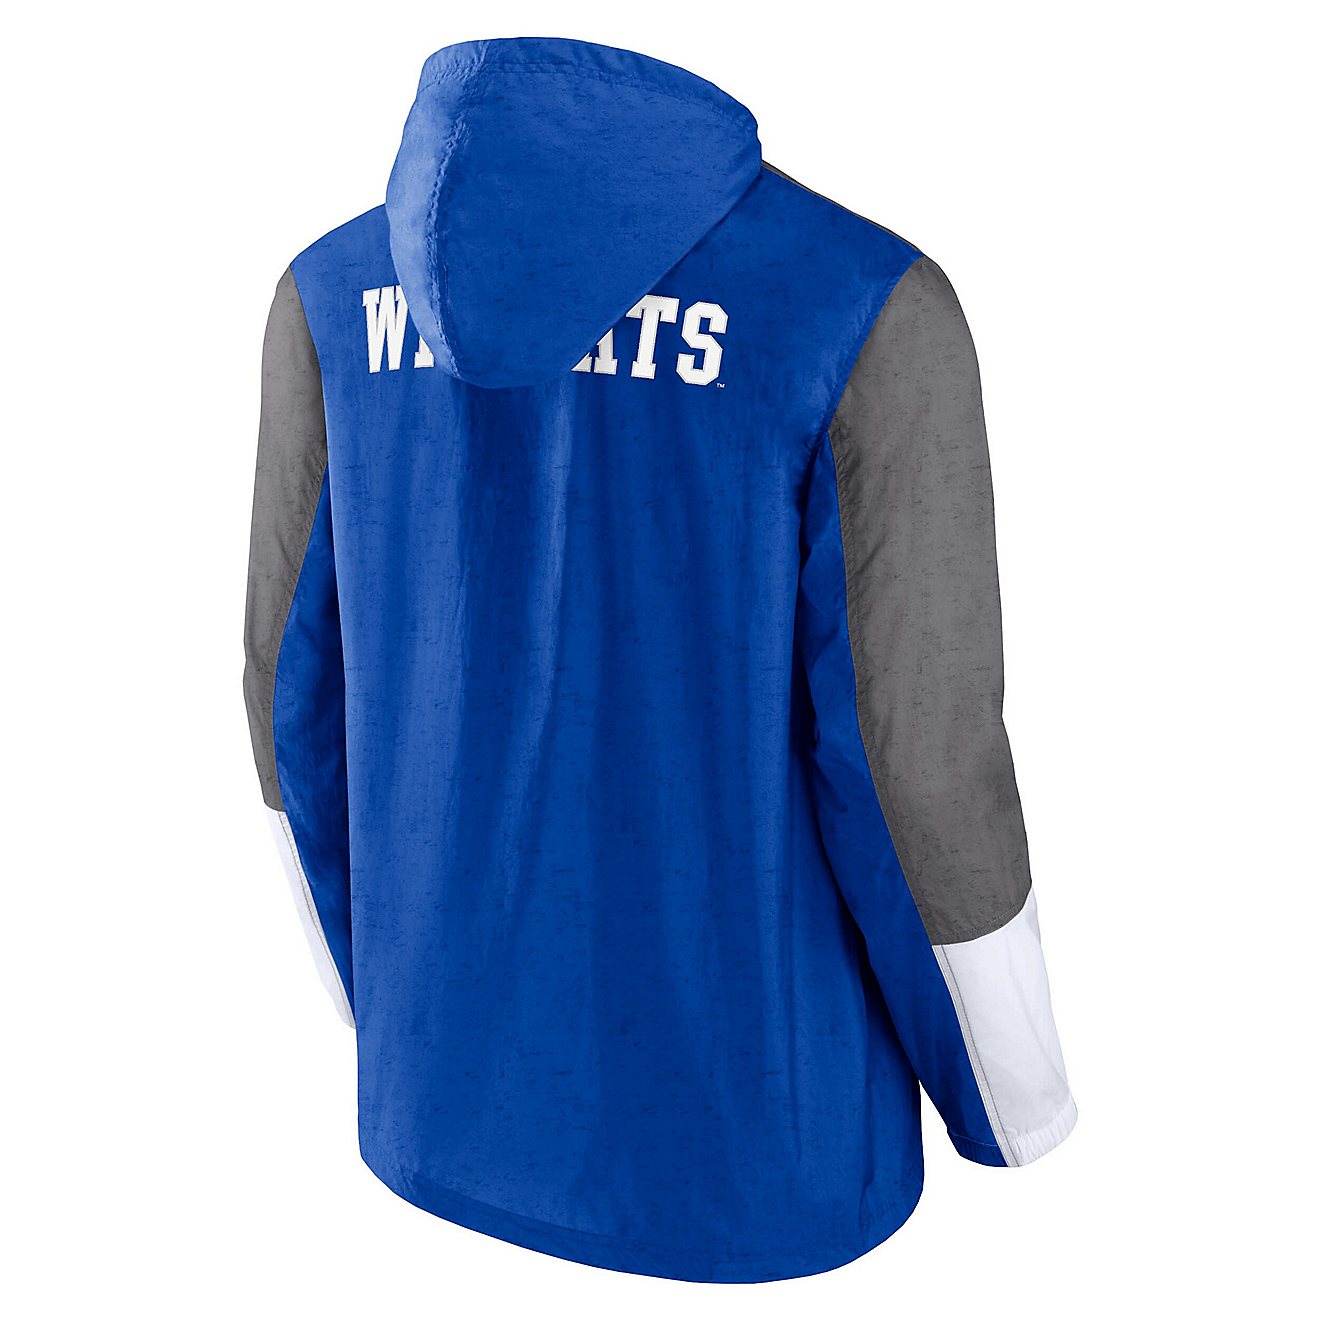 Fanatics Branded /Gray Kentucky Wildcats Game Day Ready Full-Zip Jacket                                                          - view number 3